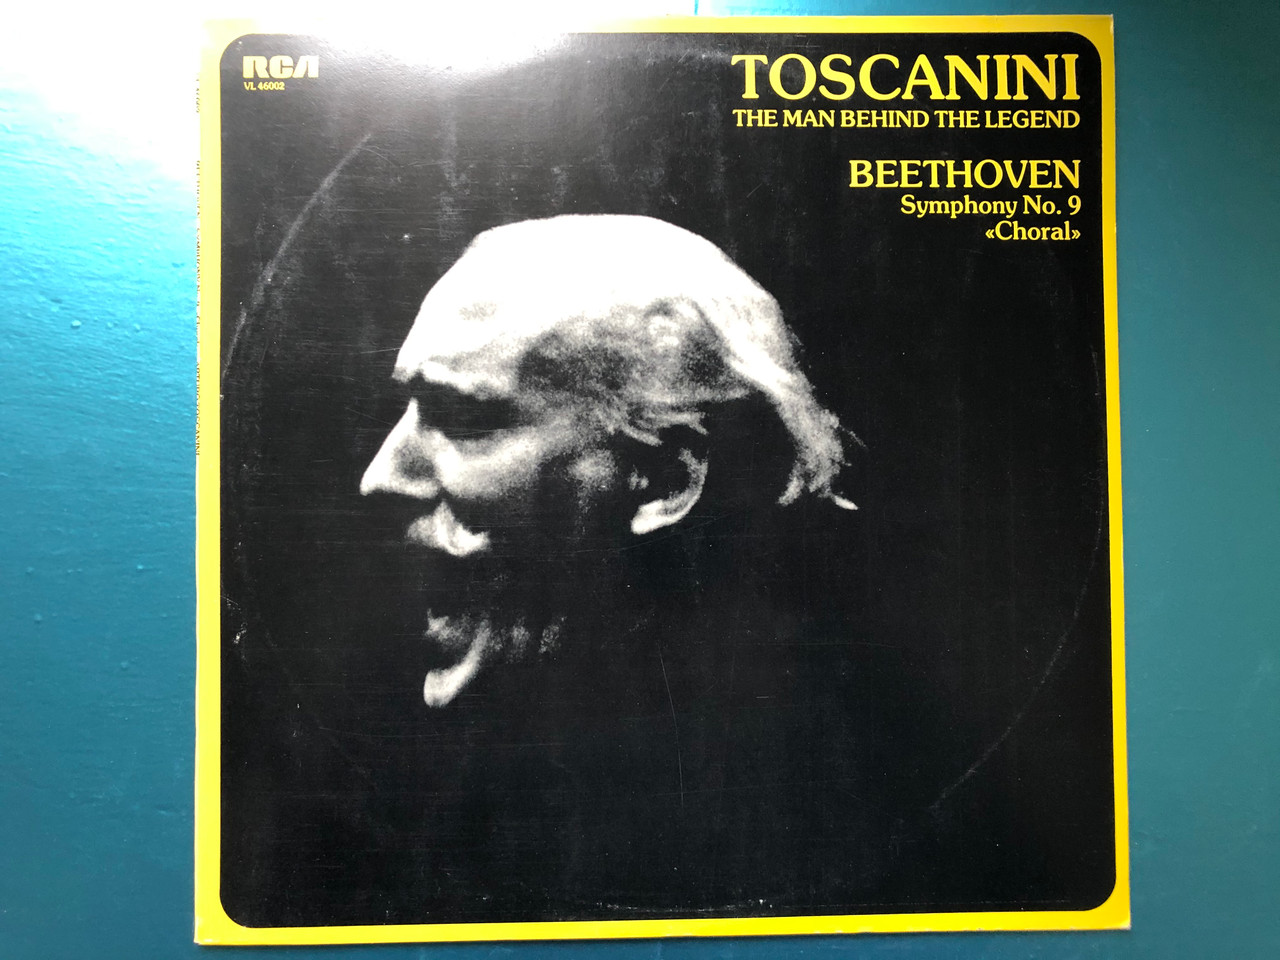 https://cdn10.bigcommerce.com/s-62bdpkt7pb/products/30120/images/178607/Toscanini_-_The_Man_Behind_The_Legend_Beethoven_-_Symphony_No._9_Choral_RCA_LP_Stereo_VL_46002_1__41743.1621407835.1280.1280.JPG?c=2&_ga=2.6037690.848799716.1621432646-1175760032.1621432646